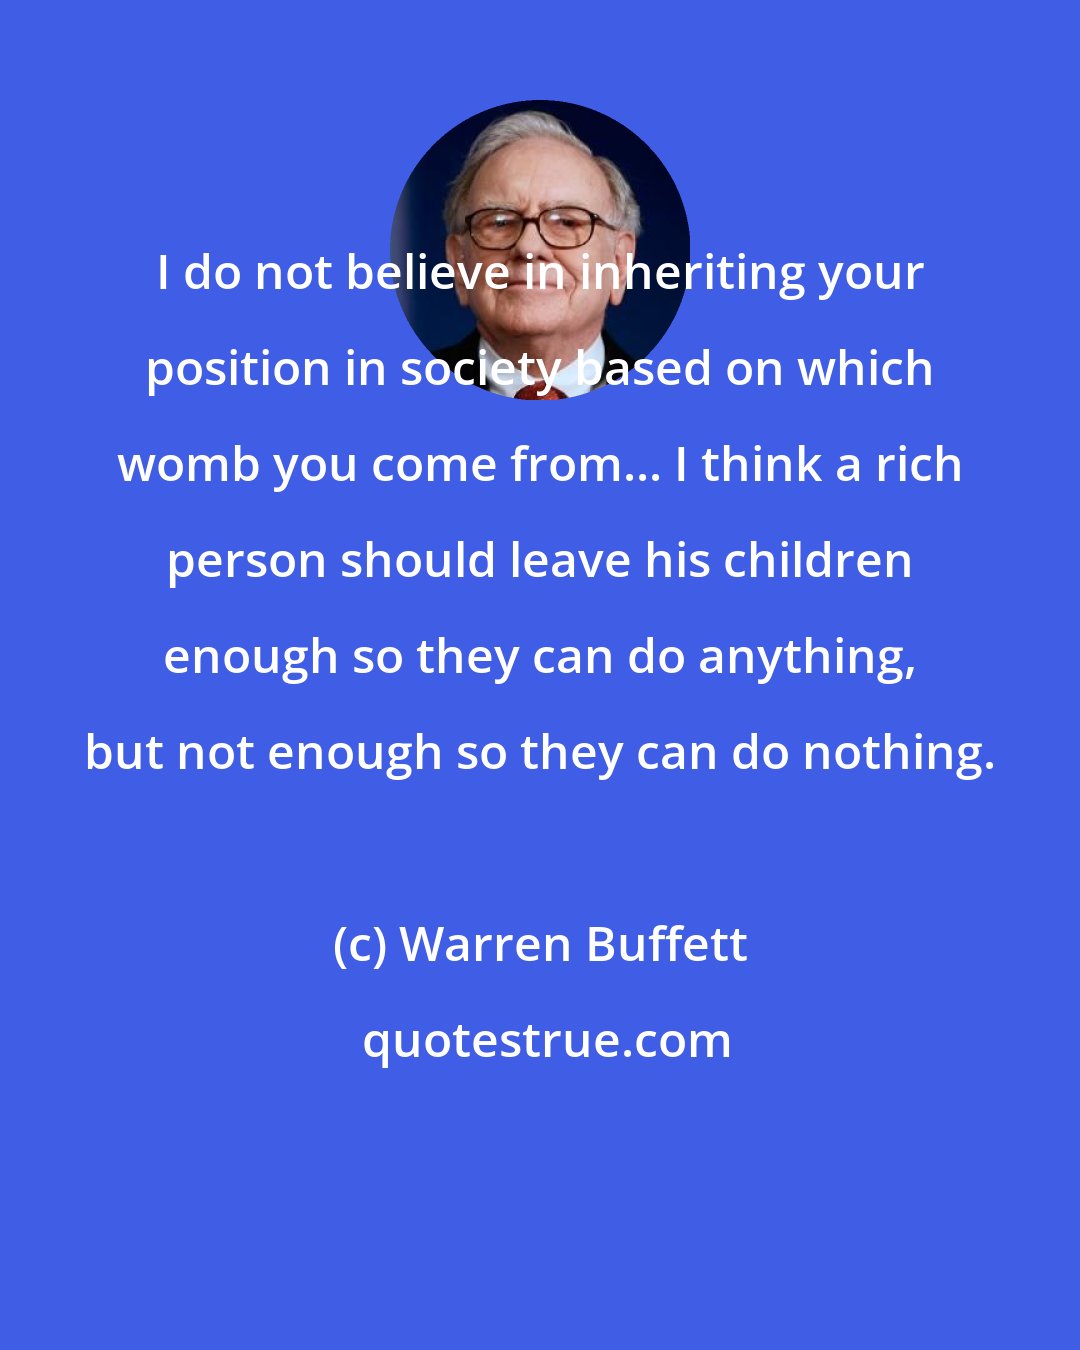 Warren Buffett: I do not believe in inheriting your position in society based on which womb you come from... I think a rich person should leave his children enough so they can do anything, but not enough so they can do nothing.